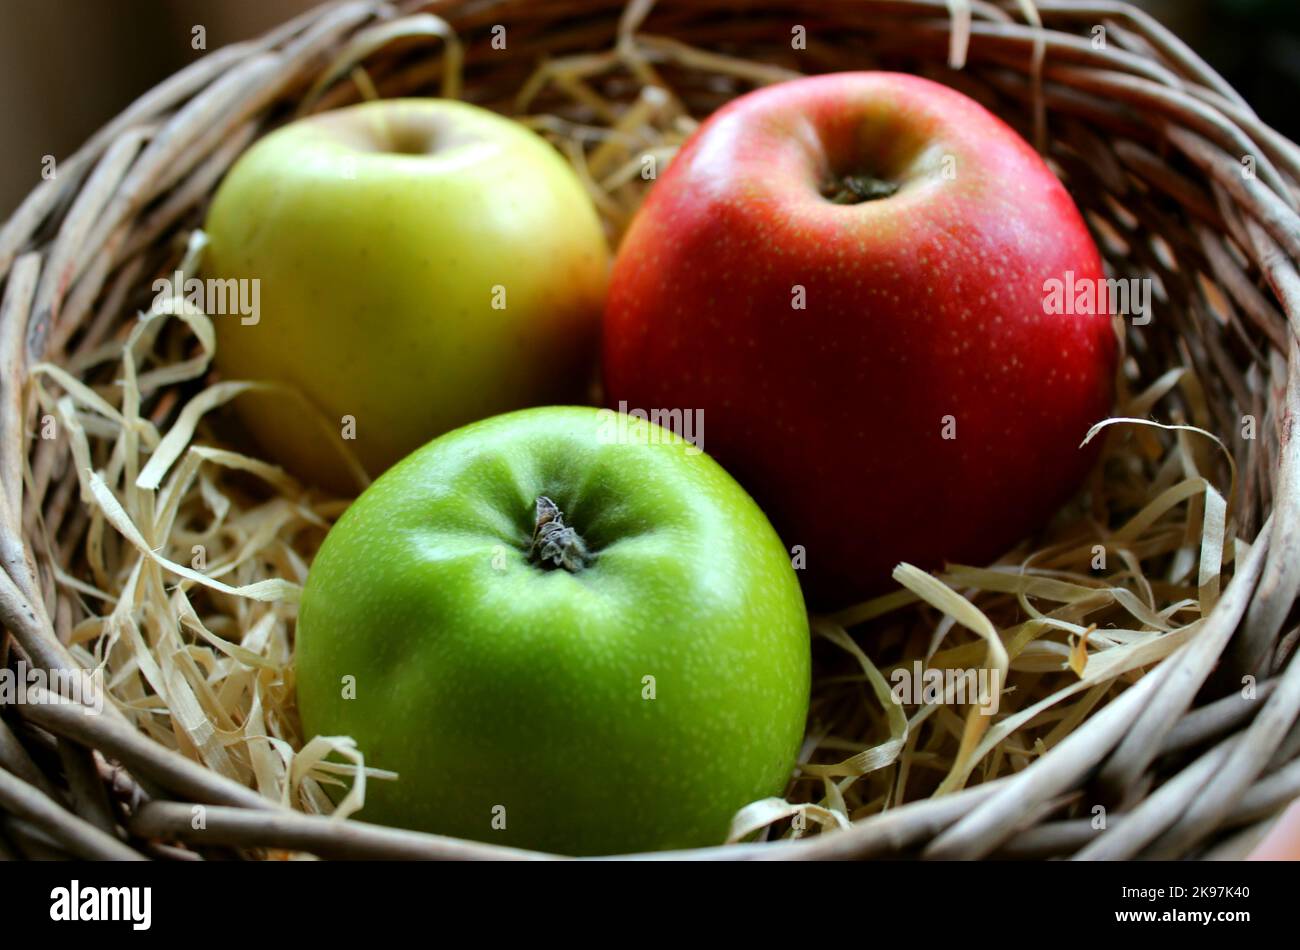 Gala Apple, Granny Smith Apple And Golden Delicious Apple Lie Side By Side In A Wicker Basket Stock Photo